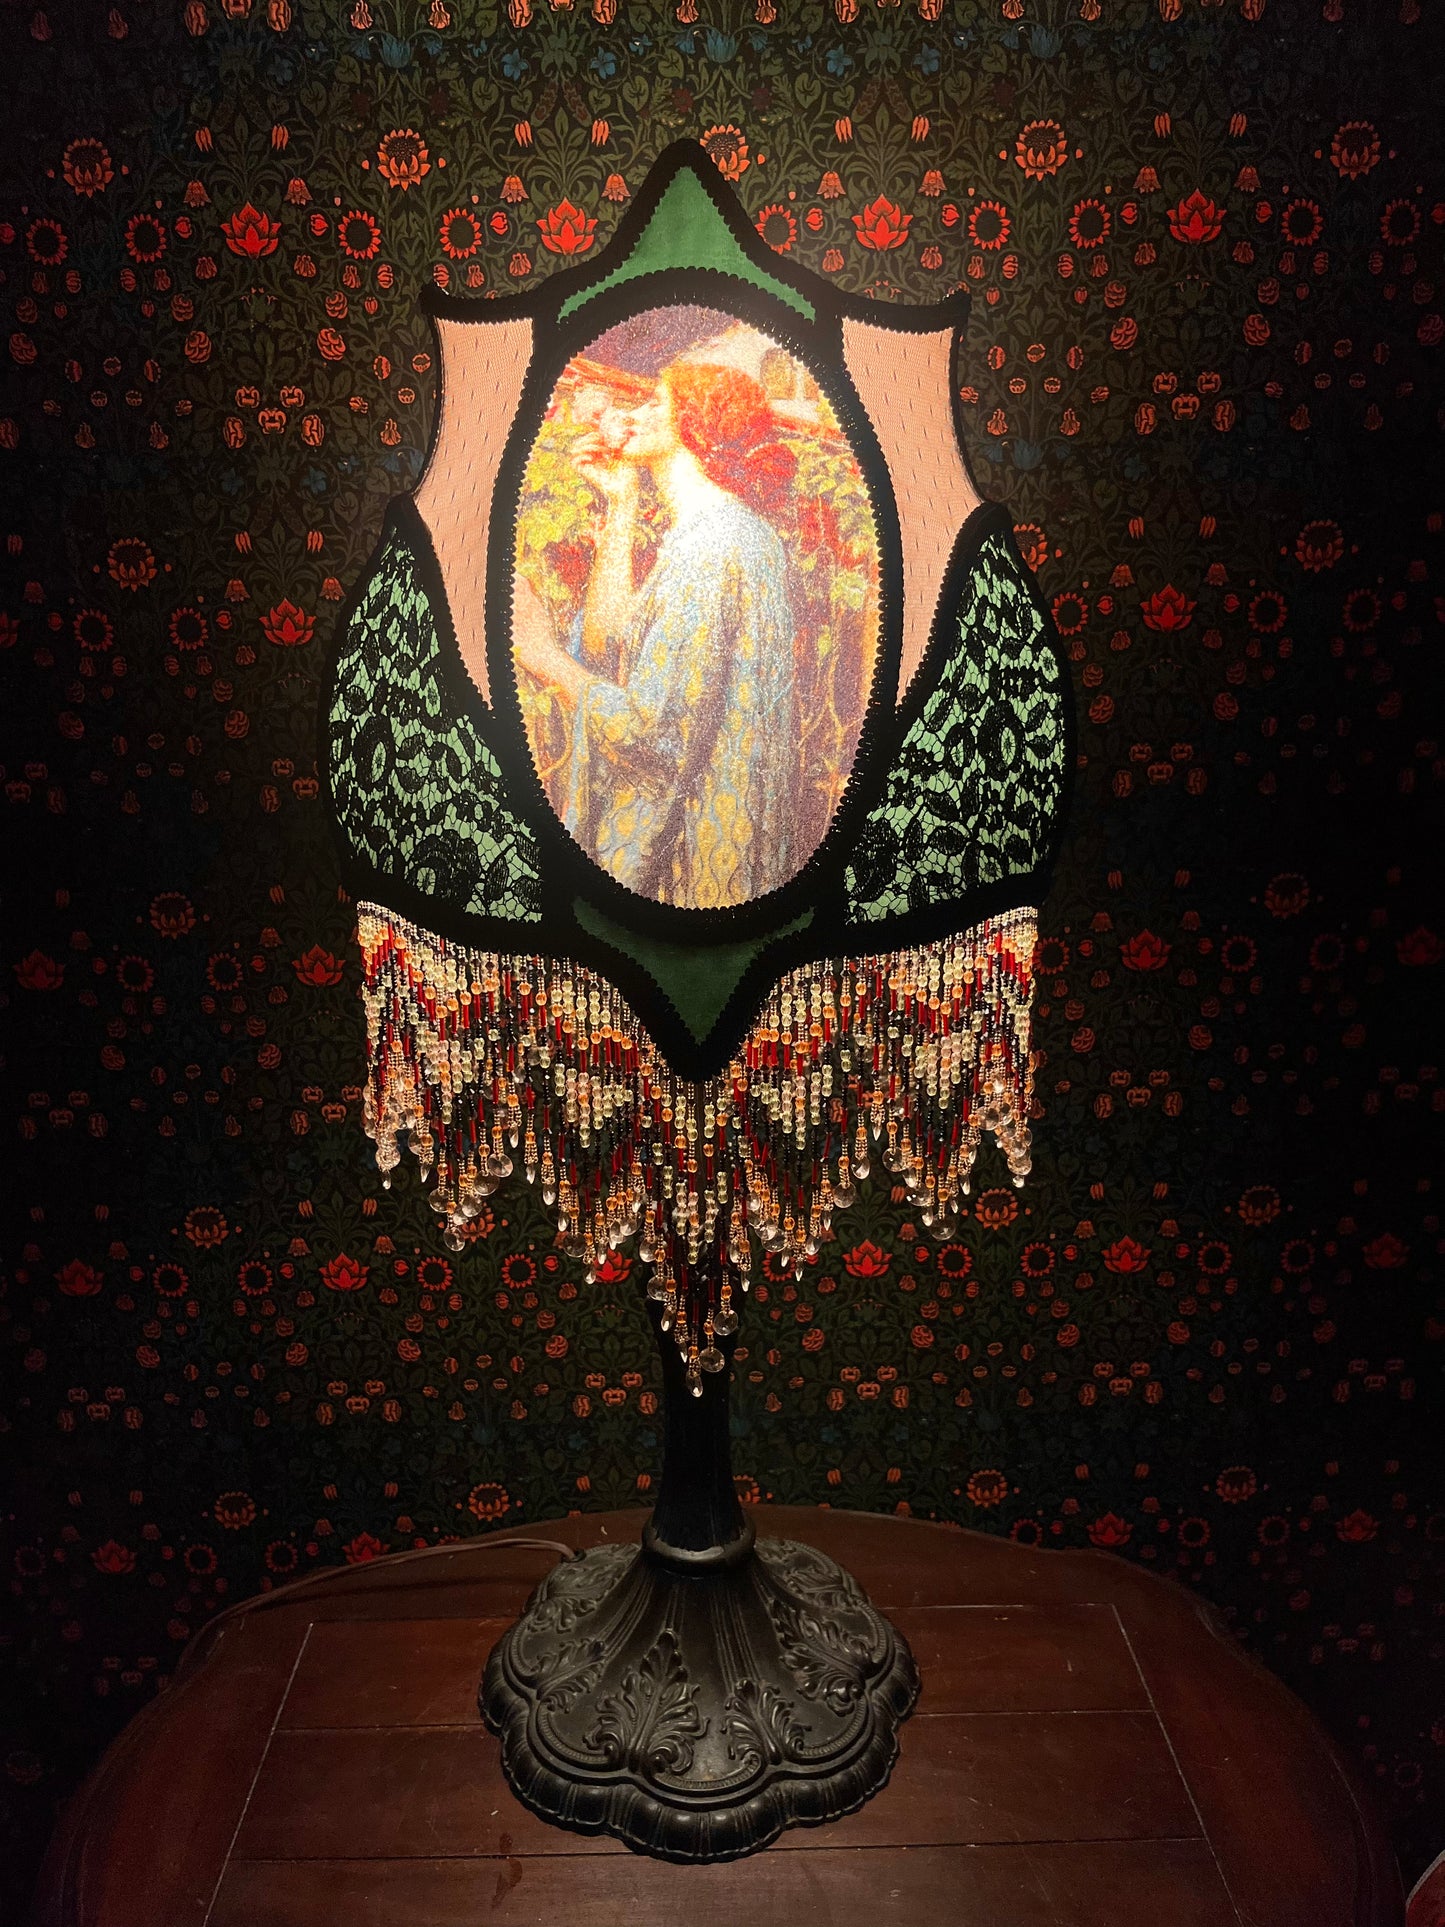 "The Soul of the Rose" Pre-Raphaelite Lampshade